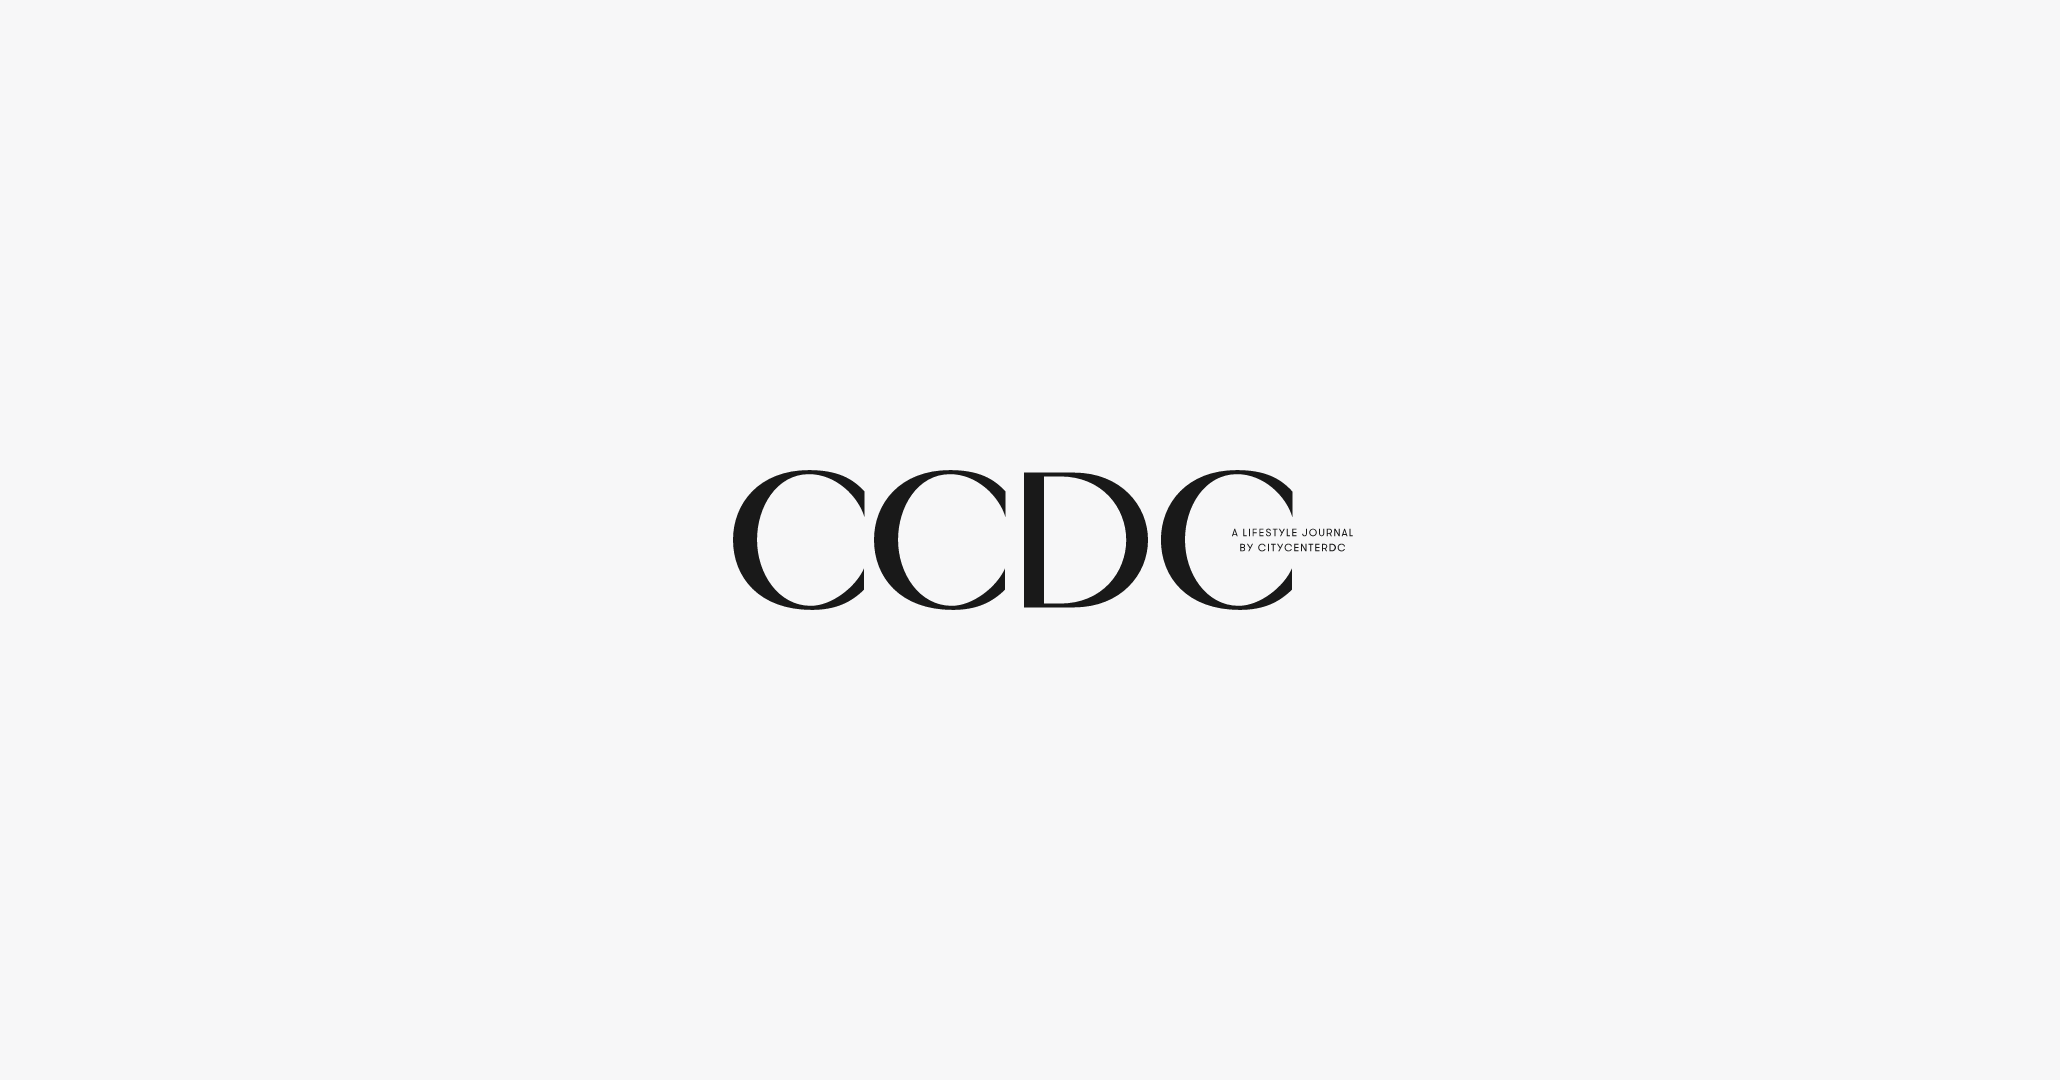 CCDC Journal Logo: elegant letters in a style evocative of a fashion logo